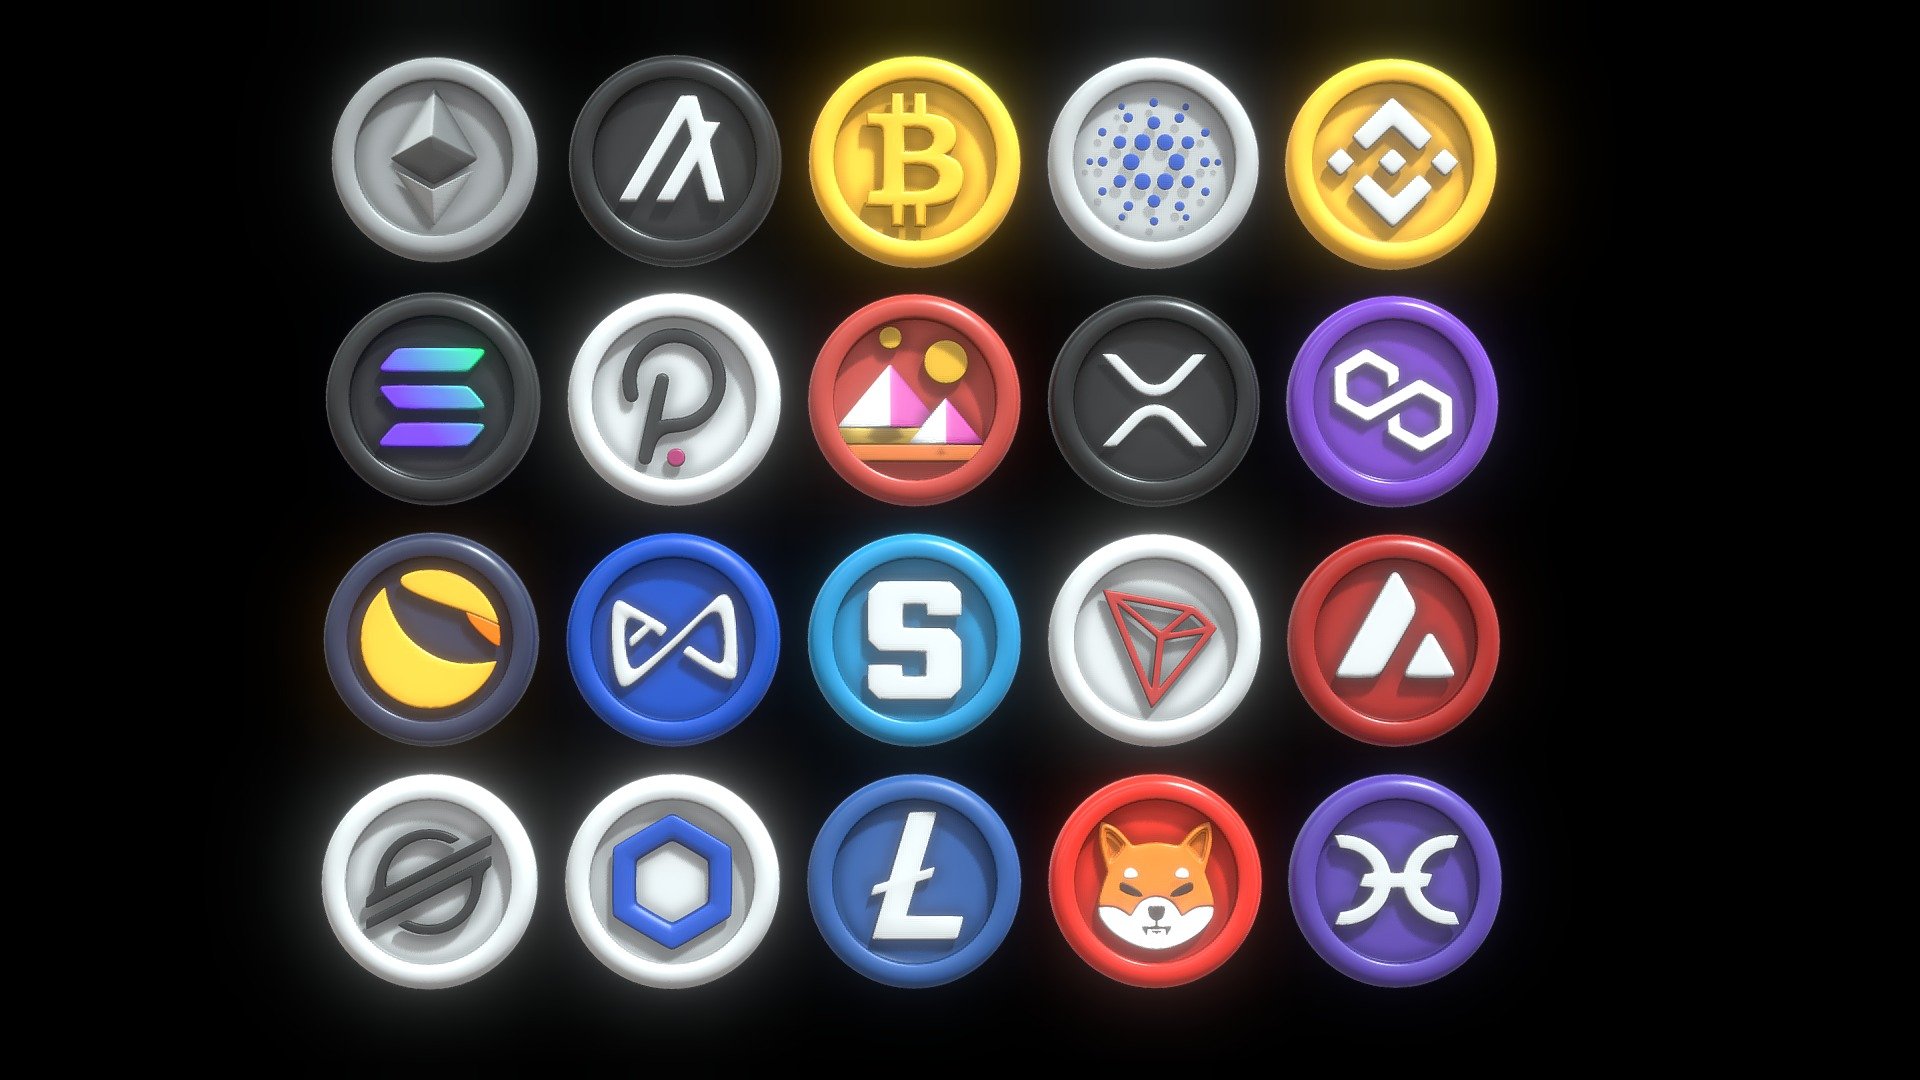 3D 20 Cryptocurrency coin pack with cartoon style Made in Blender 3.3.1

Coin List :




Ethereum

Holo

Litecoin

Terra

Polkadot

Polygon

Sandbox

Solana

Stellar

Tron

Cardano

Ripple

Algorand

Avalanche

Axie Infinity Shard

Binance

Bitcoin

Chainlink

Decentraland

Shiba Inu

All of This model does include a TEXTURE, DIFFUSE, AND ROUGHNESS MAP, but if you want to change the color you can change it in the blend file, just use the principled bsdf and play with the Roughness, and Base Color parameter.

each coin exported to an FBX, OBJ, DAE, GLTF and STL format - 20 Cryptocurrency coin pack with cartoon style - Buy Royalty Free 3D model by pakyucangkun 3d model